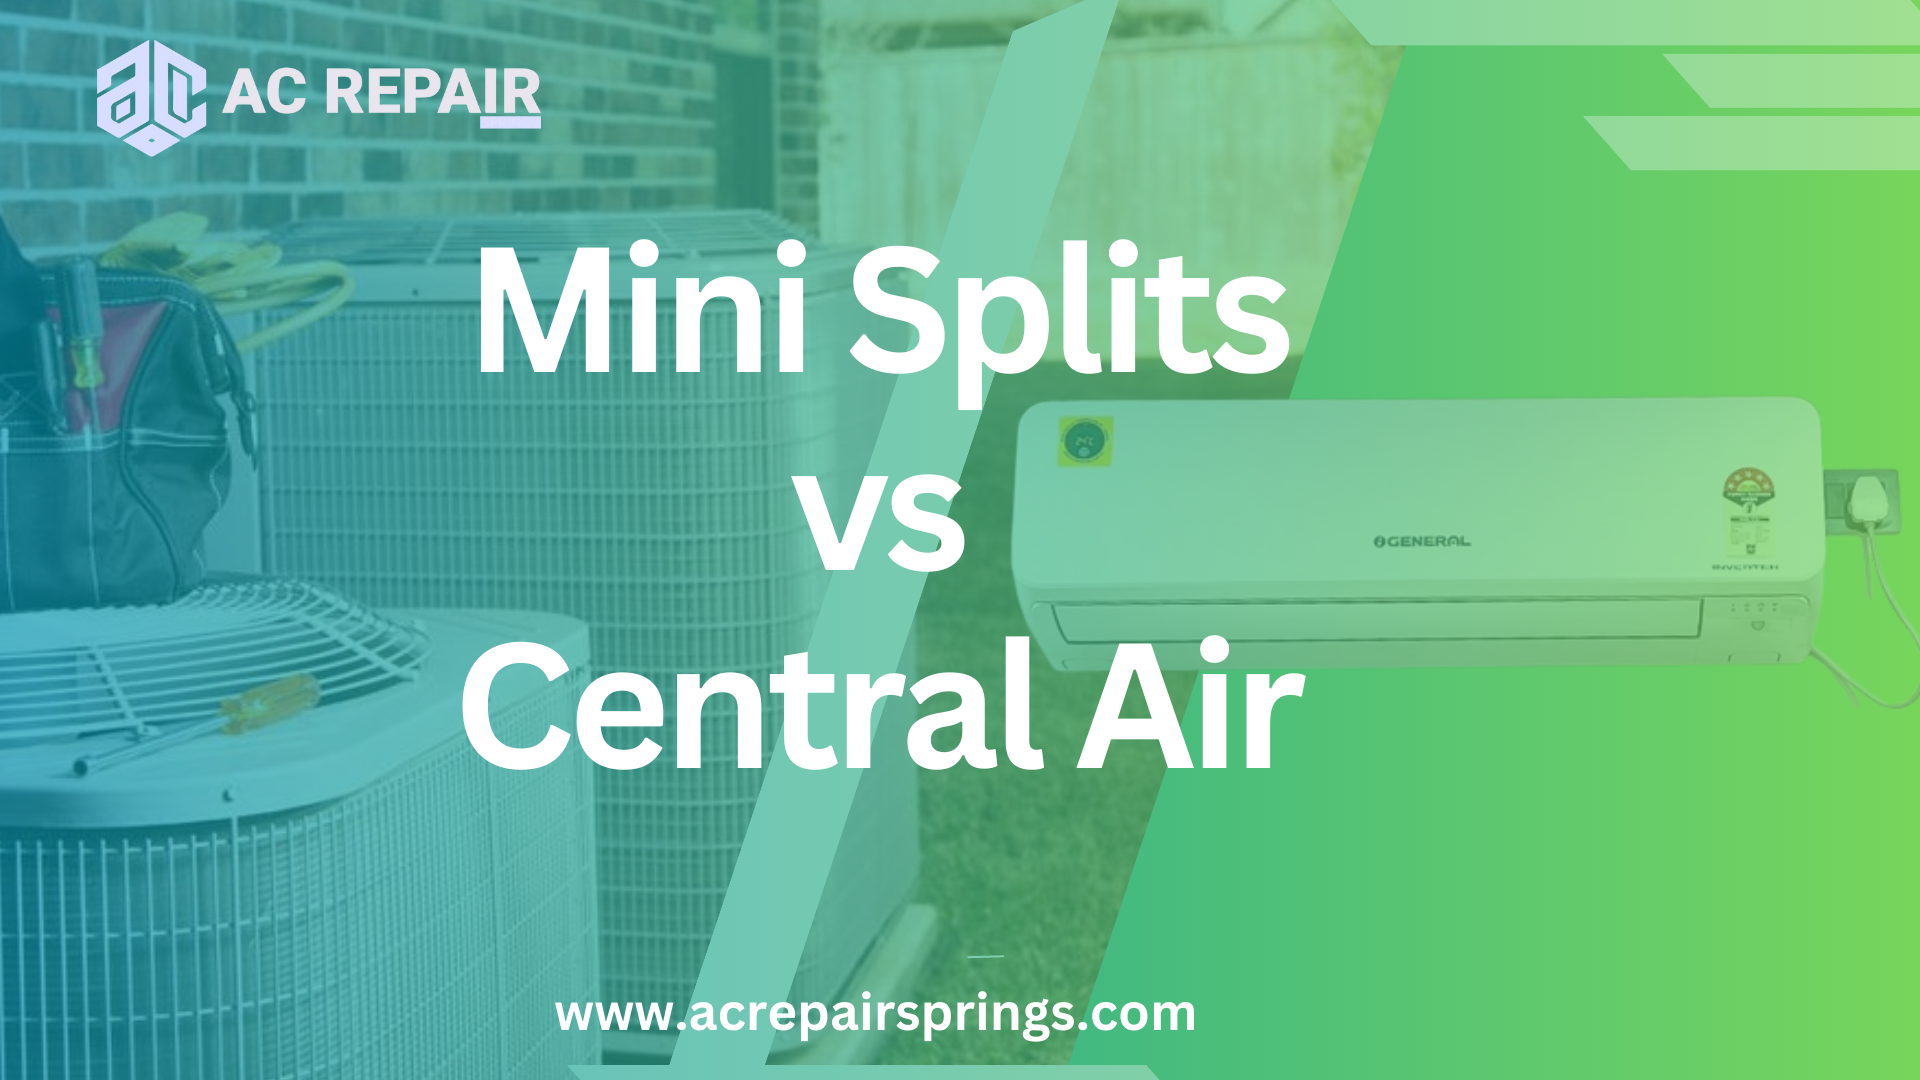 Are Mini Splits More Efficient Than Central Air?